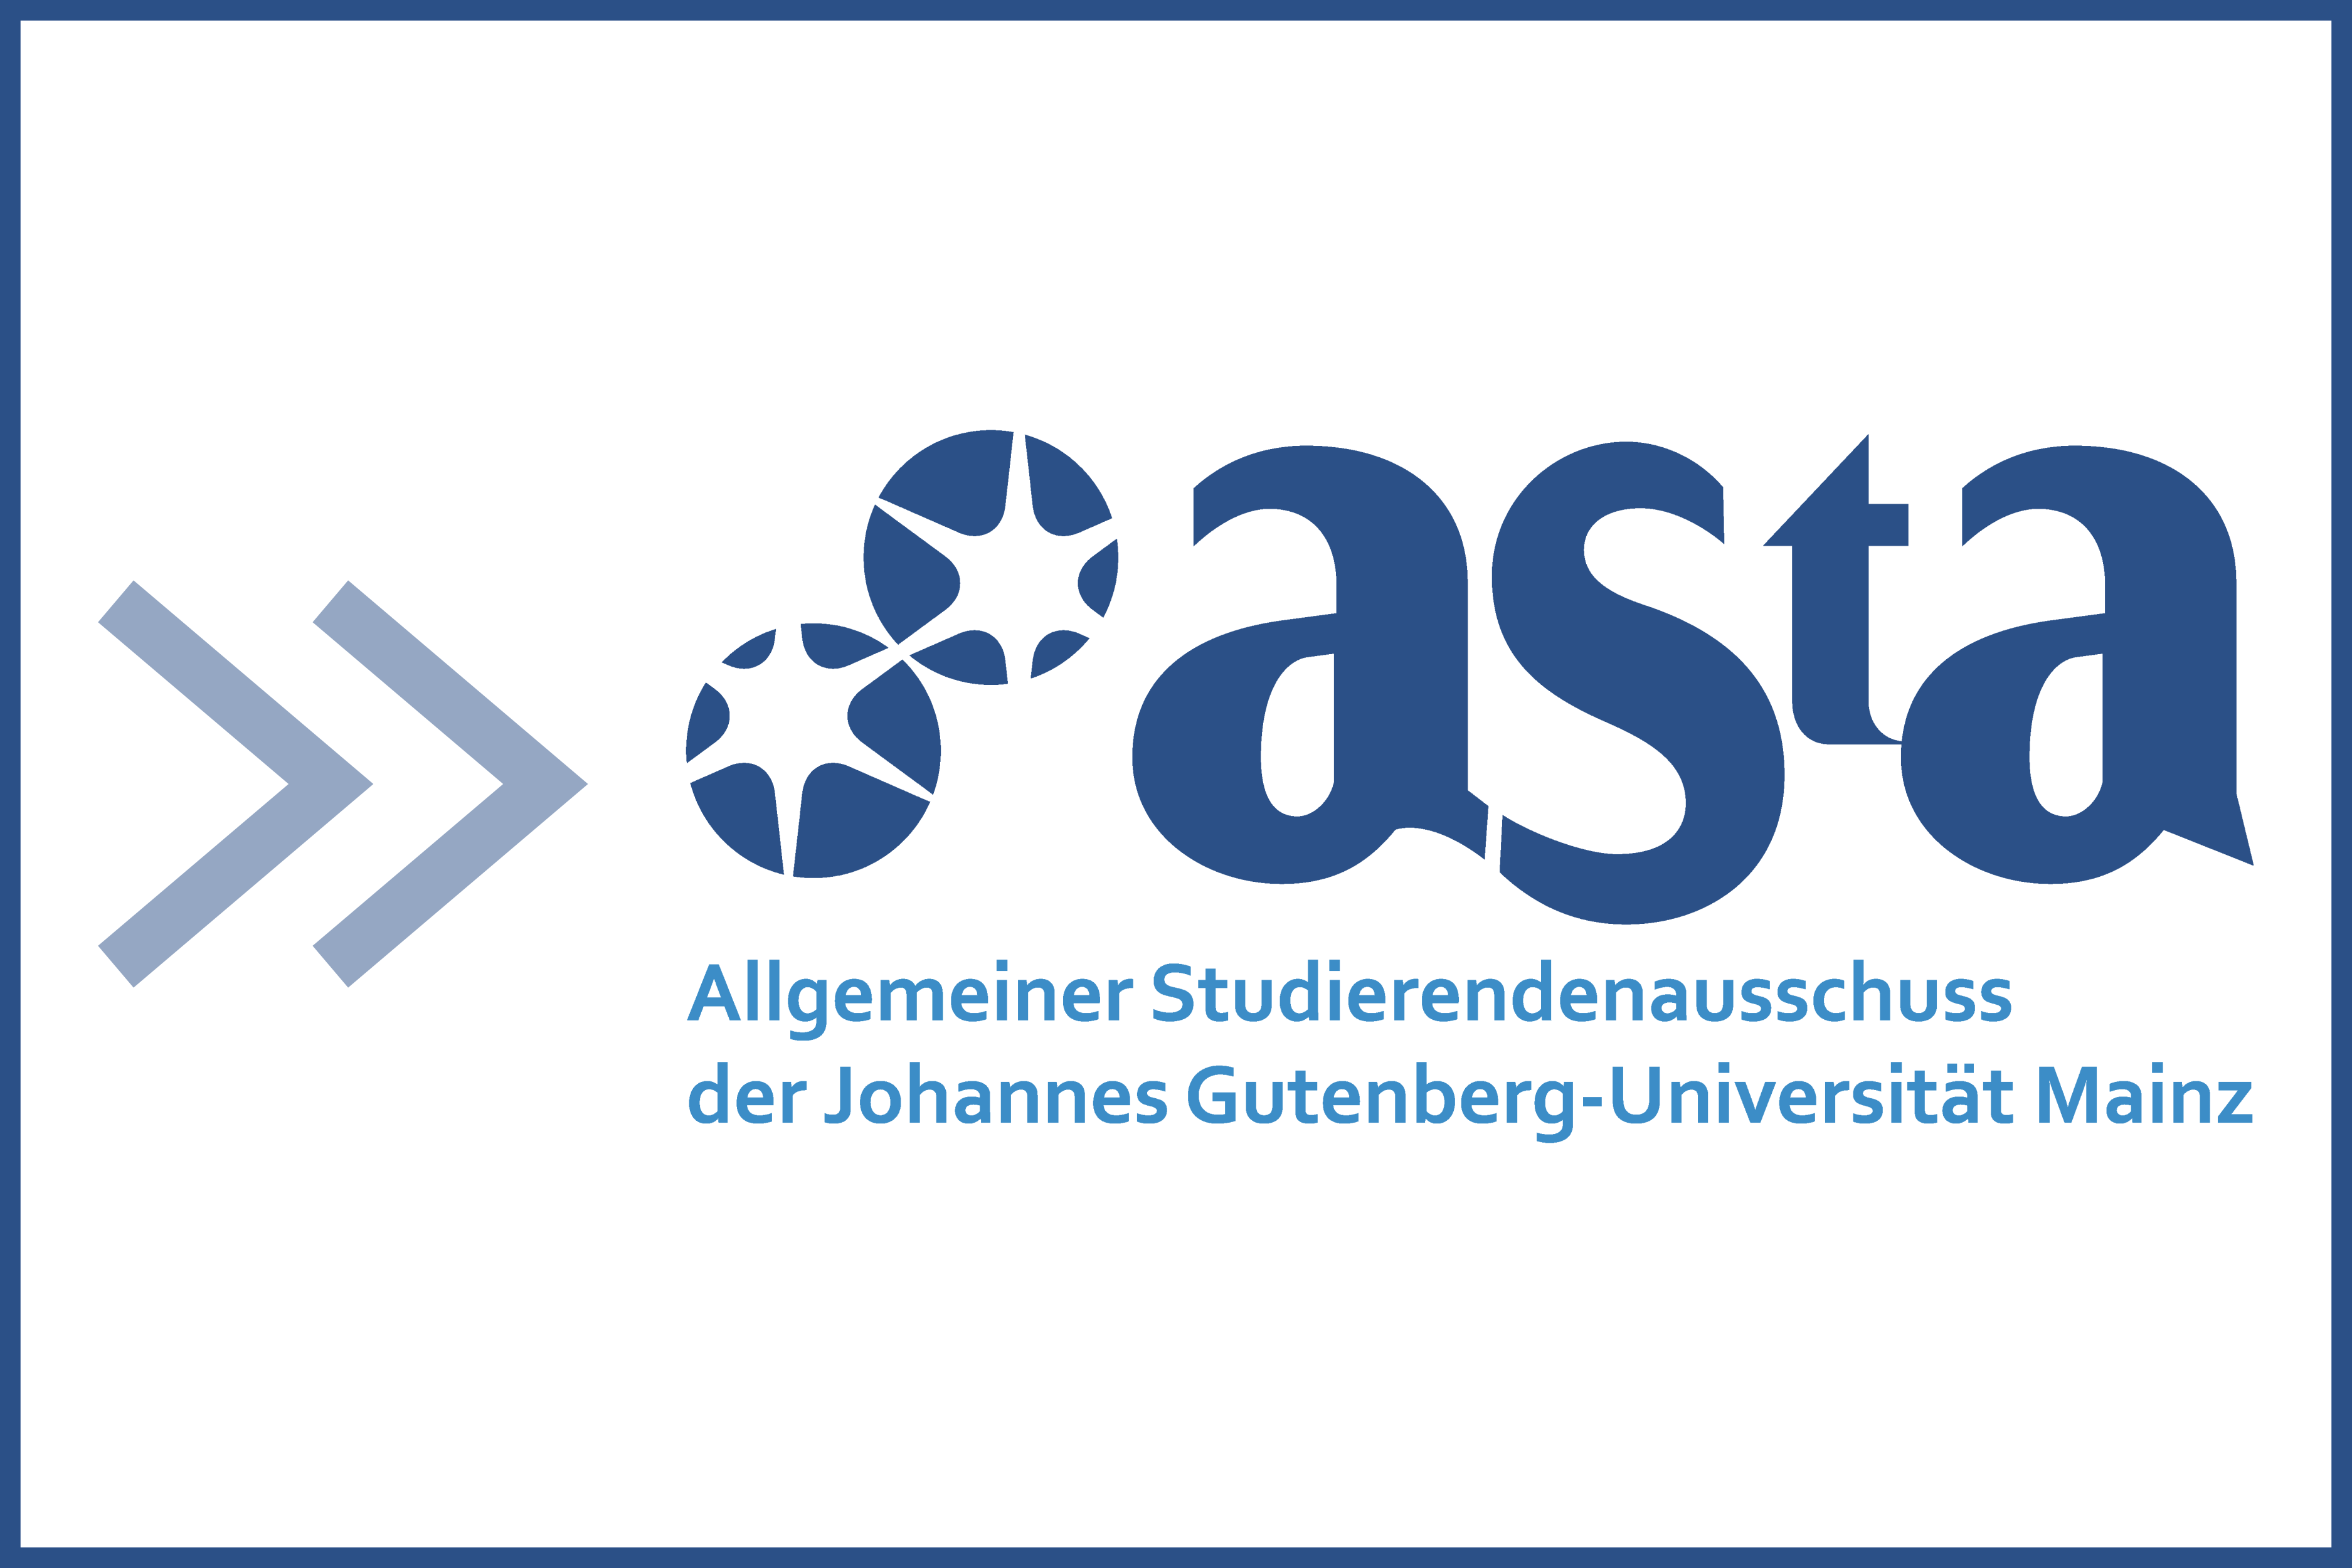 Logo of the General Student Committee (AStA)